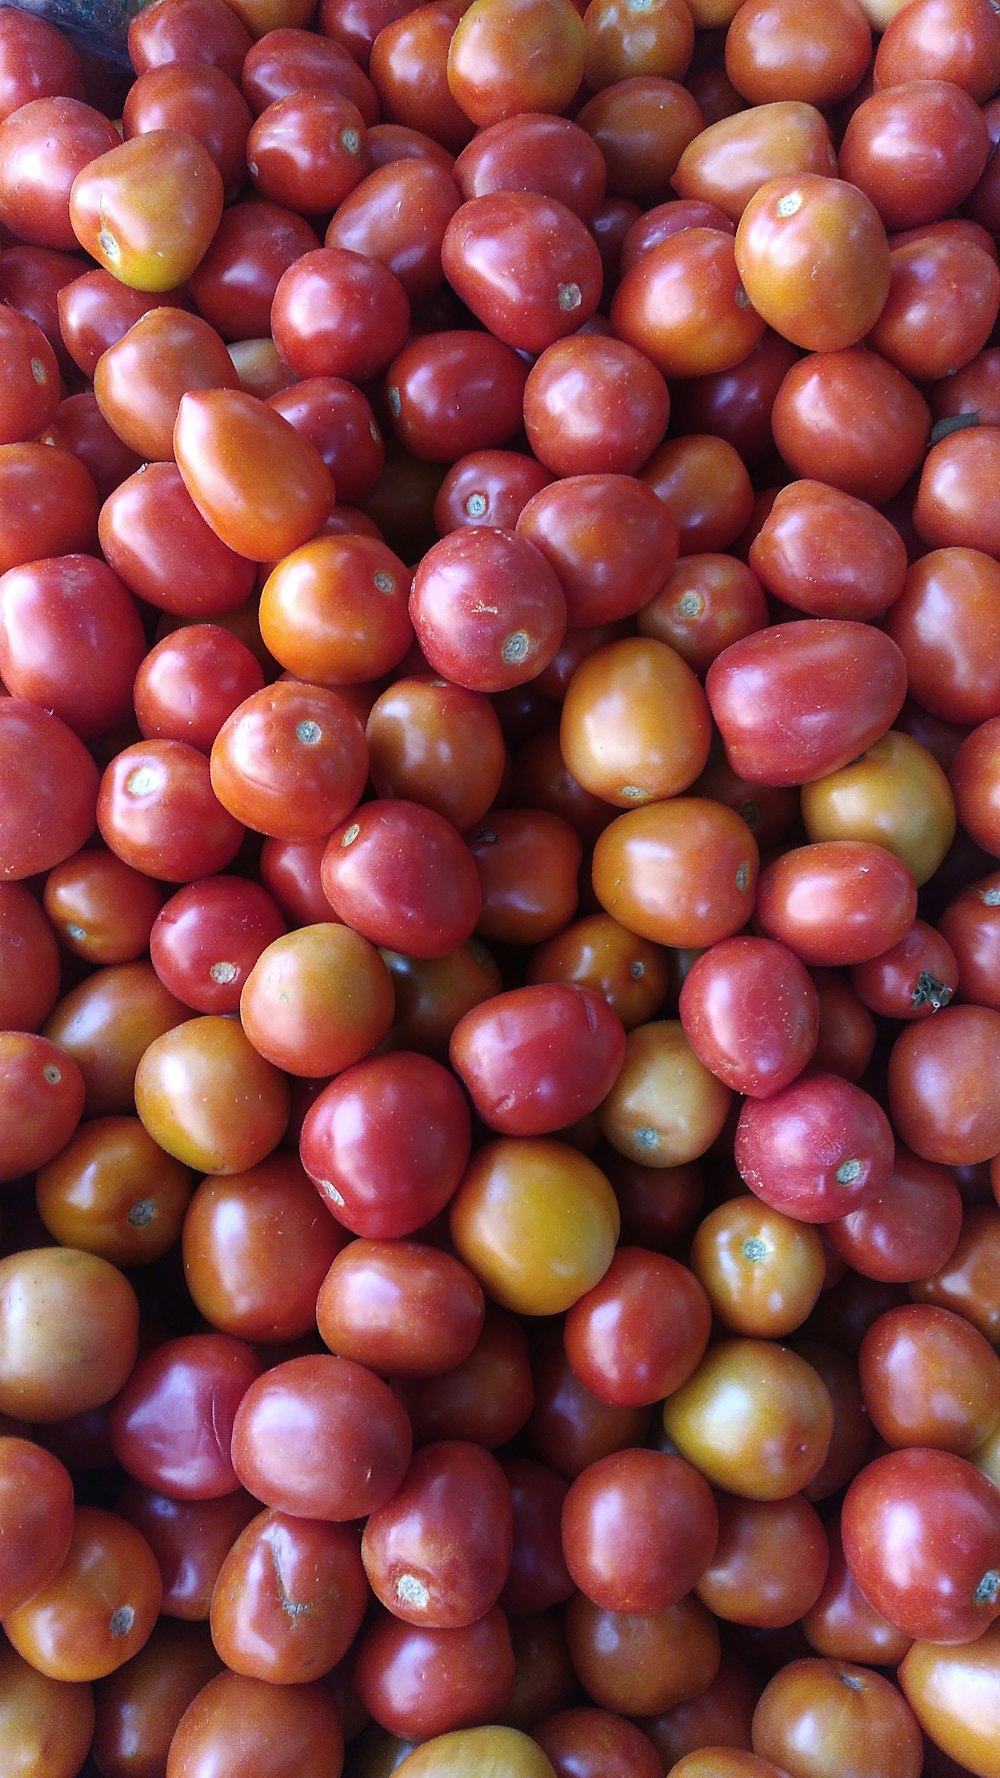 a large pile of red and yellow tomatoes